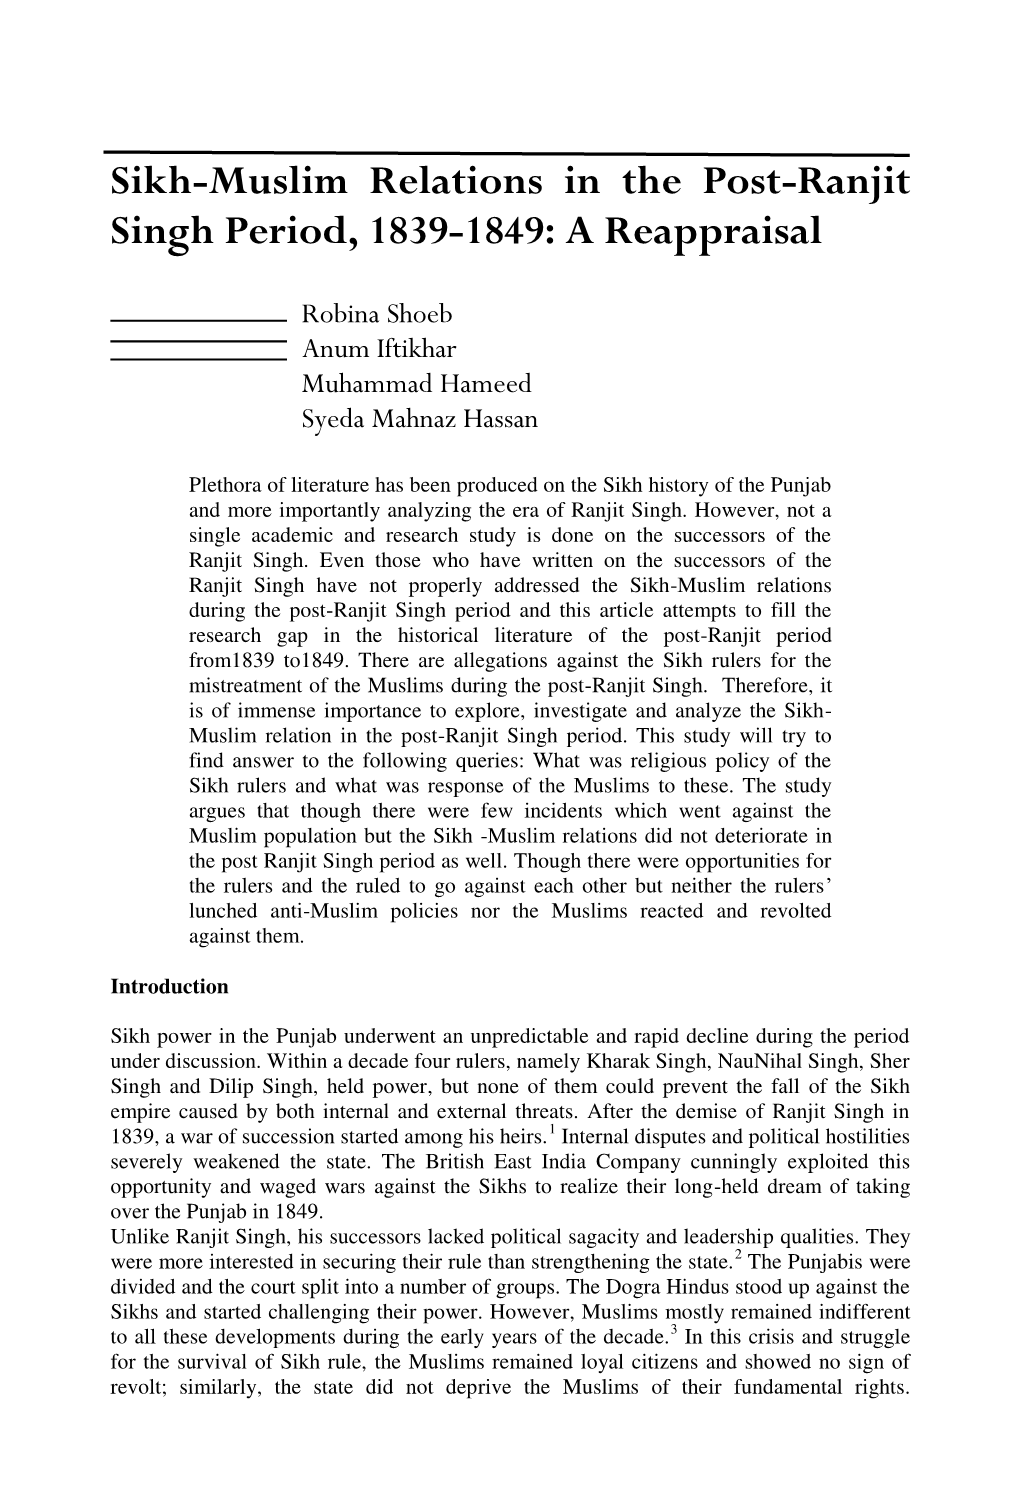 Sikh-Muslim Relations in the Post-Ranjit Singh Period, 1839-1849: a Reappraisal